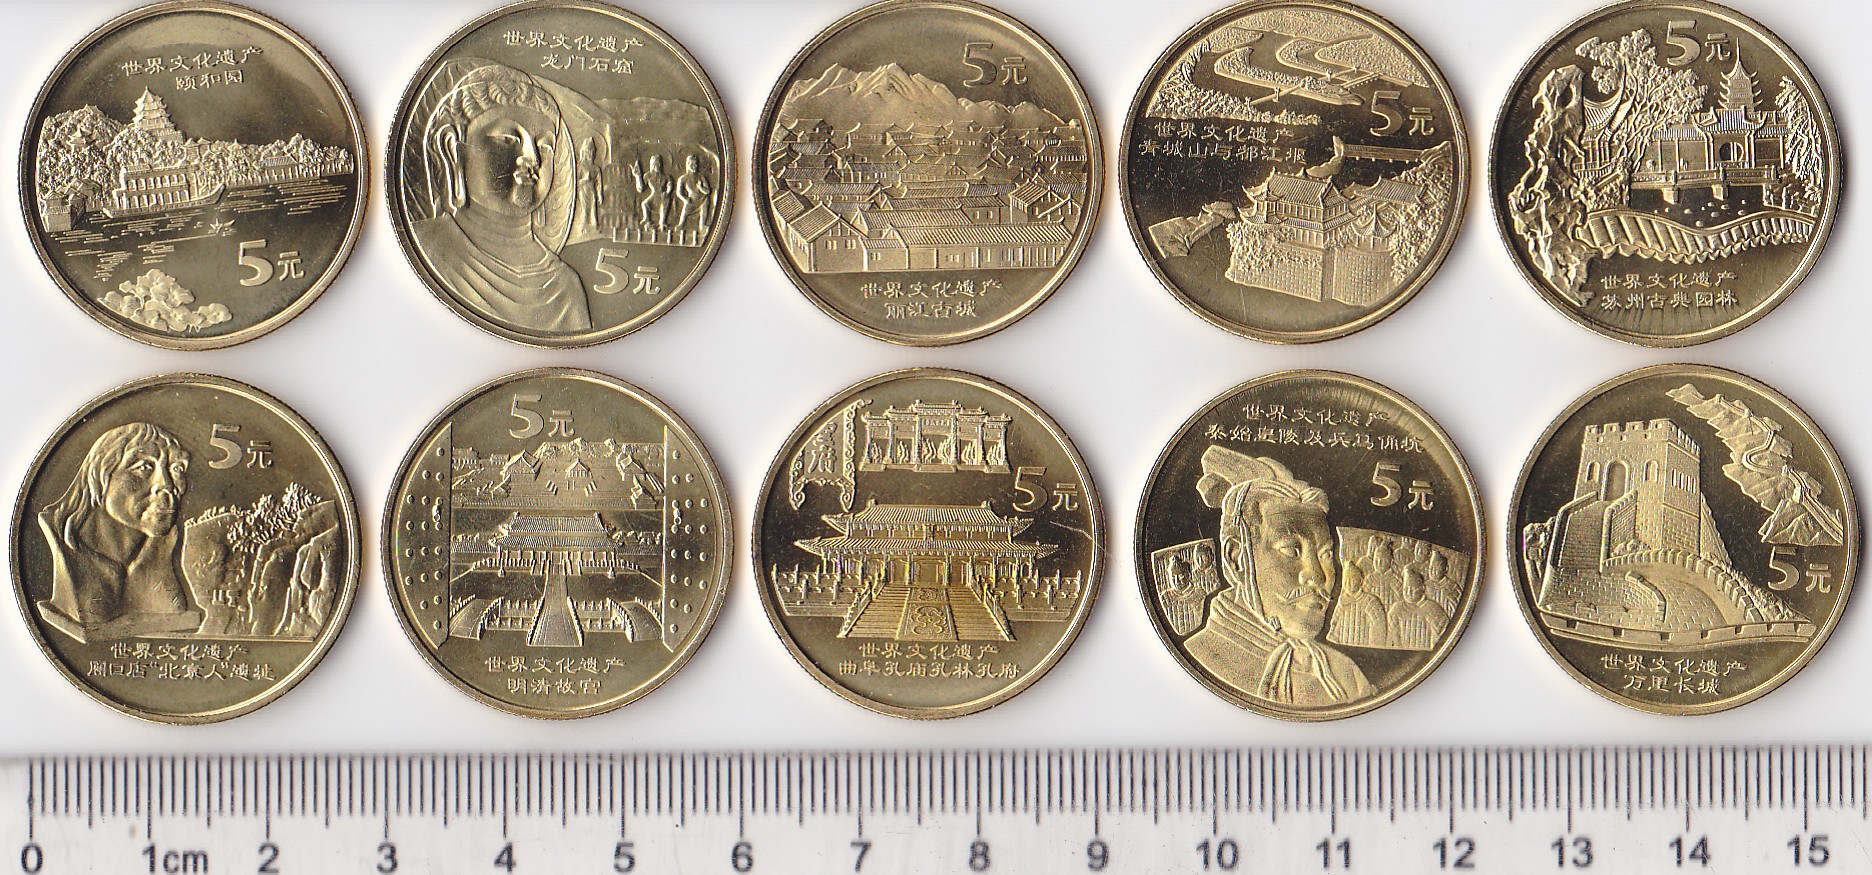 K7552, China World Heritage Series, 10 pcs Coins, 2002 to 2006